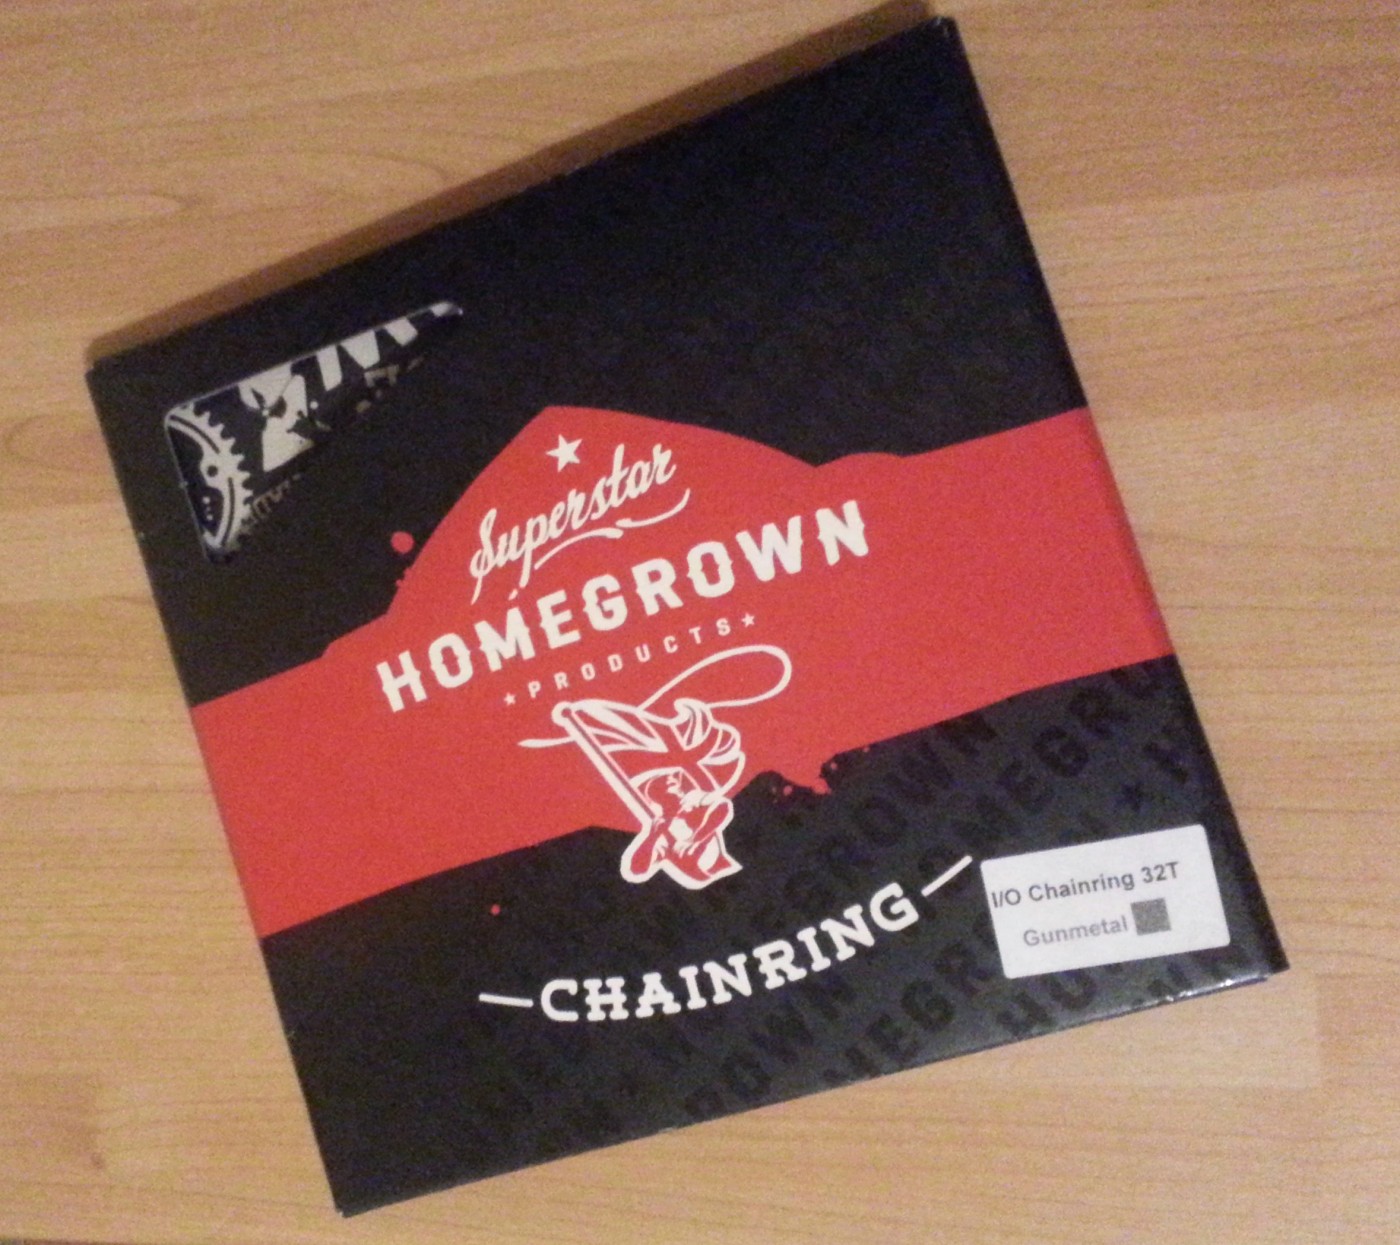 Chainring in its packet